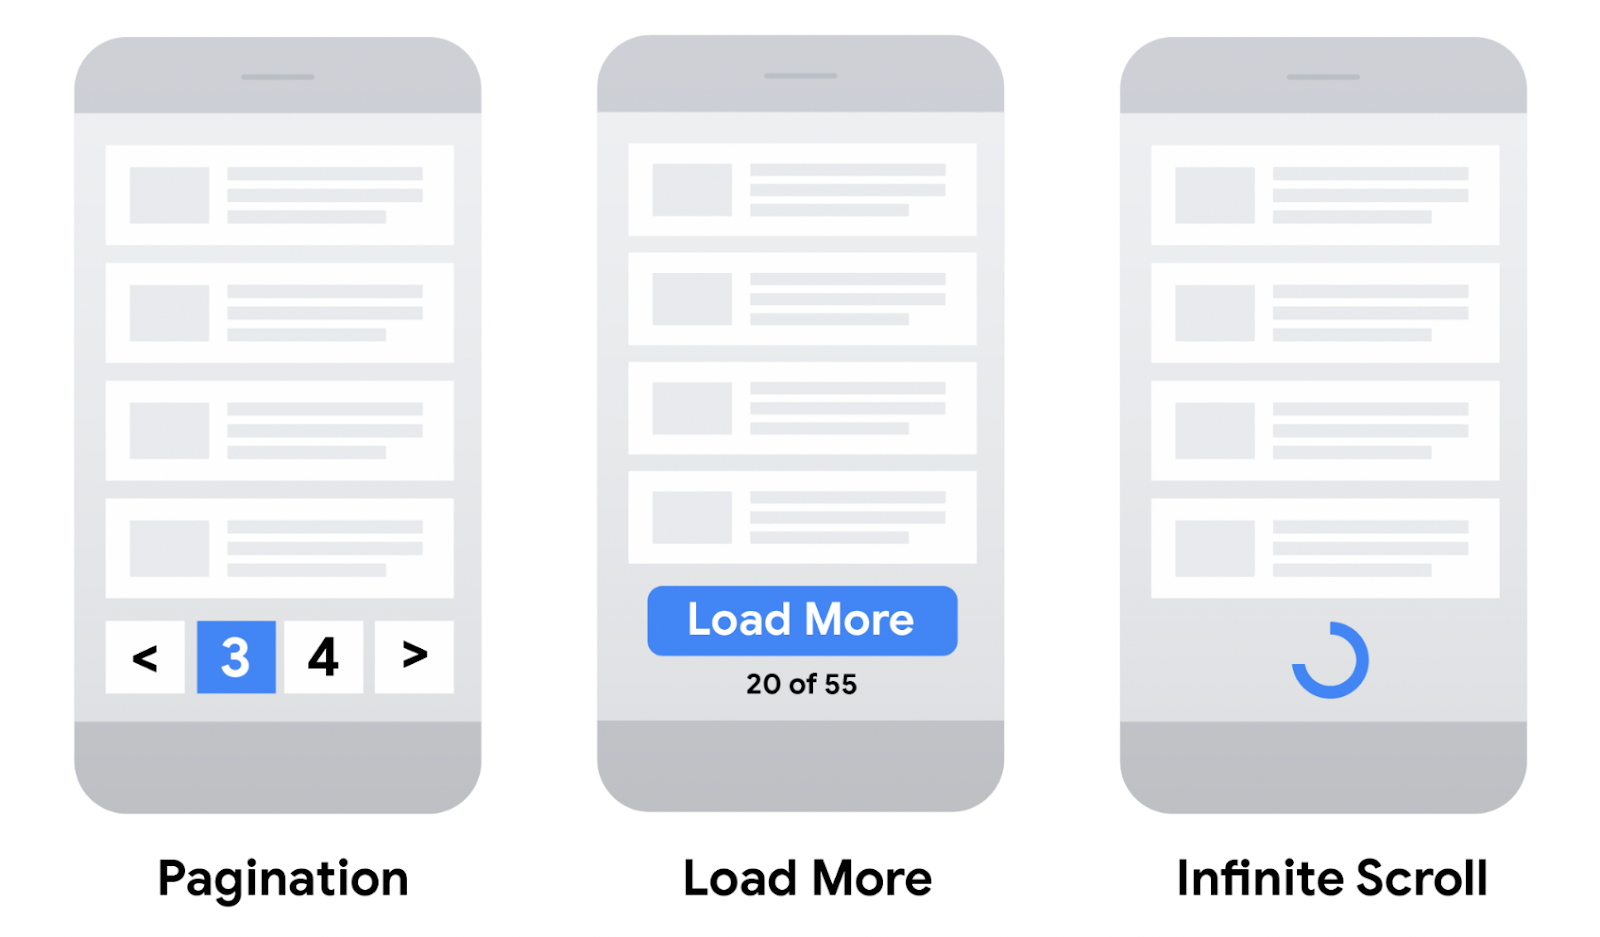 There are three types of pagination, including load more button, infinite scroll, and numeric pagination without load more button. 